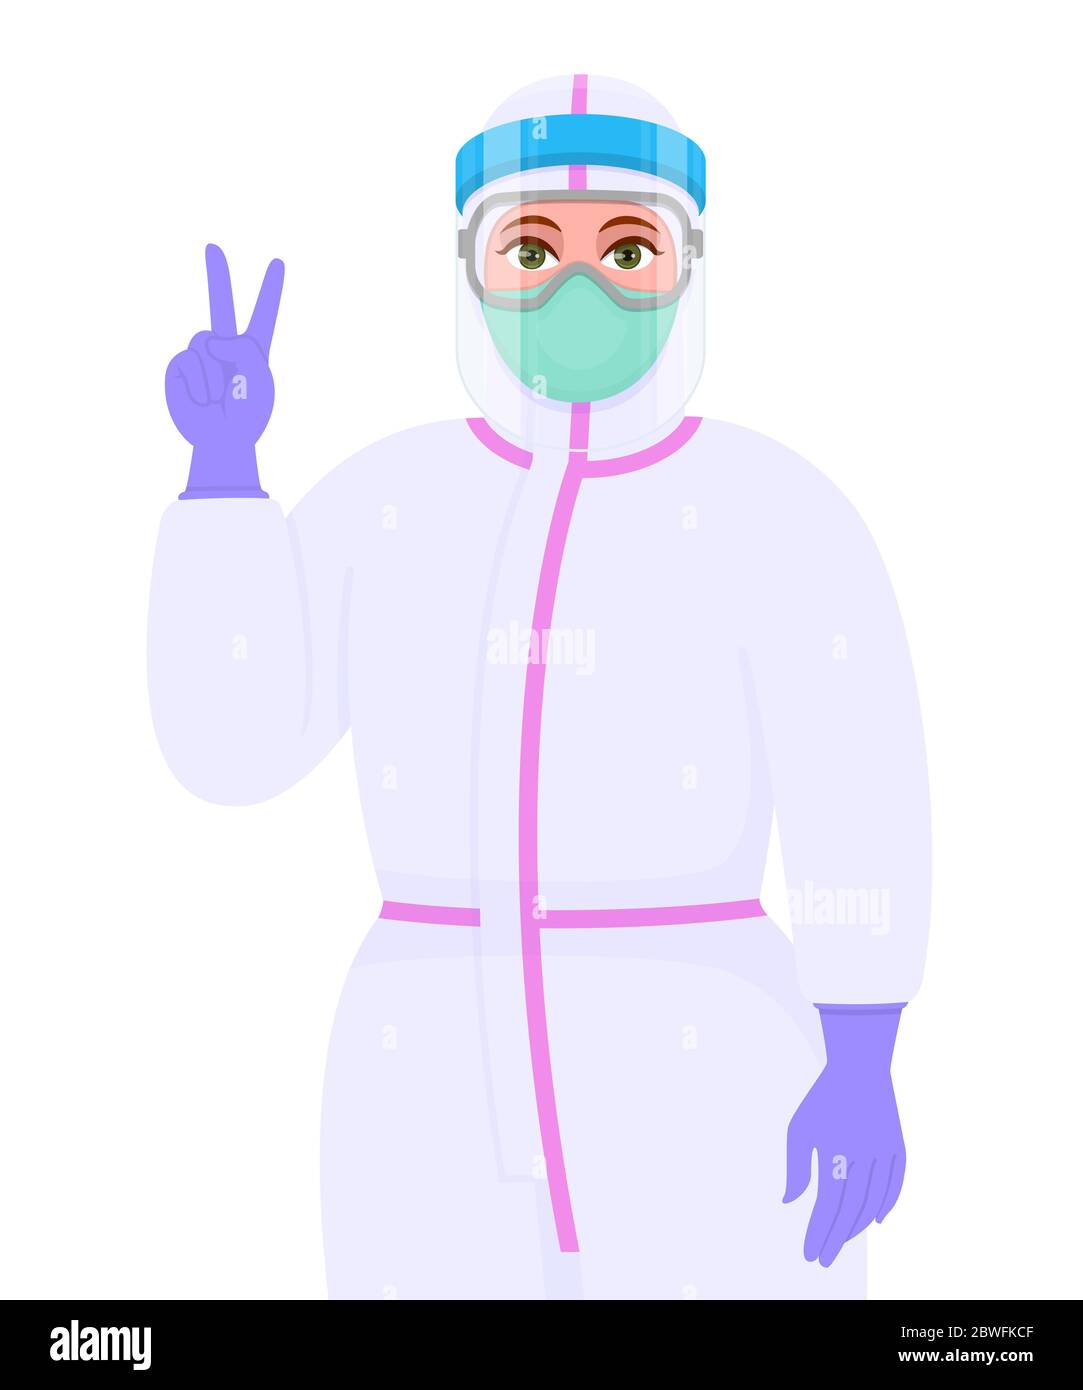 Female doctor in safety protective suit, mask and face shield showing victory or peace gesture sign. Physician gesturing success/winner hand symbol. Stock Vector